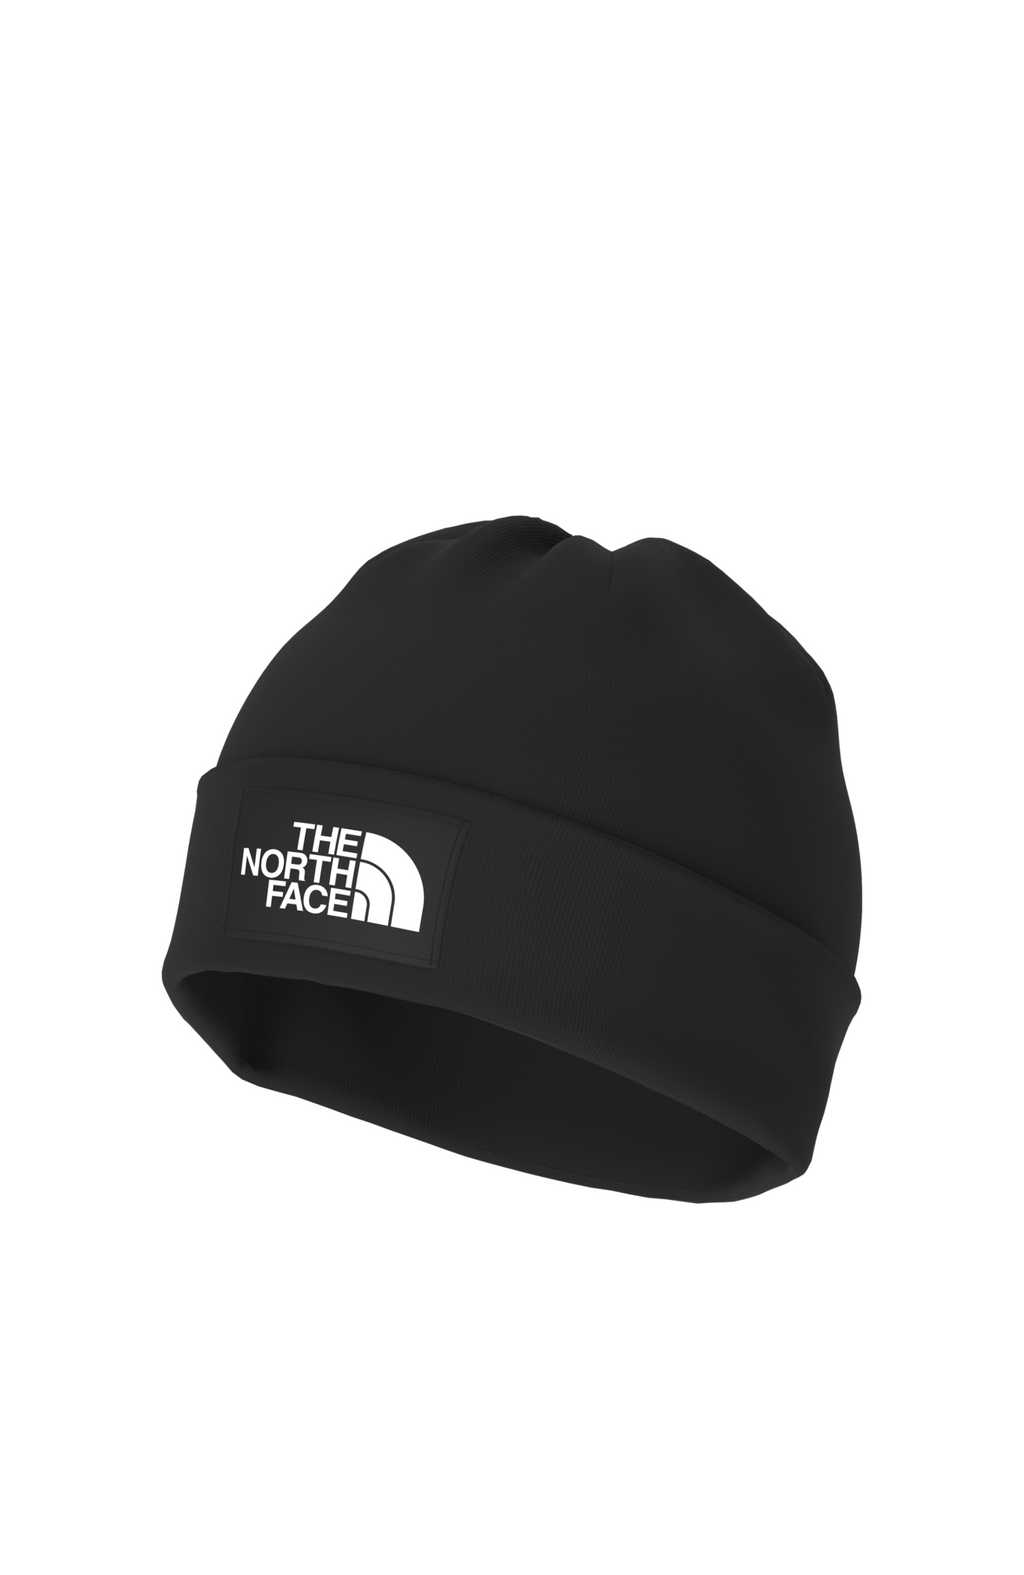 The North Face - Dock Worker Recycled Beanie